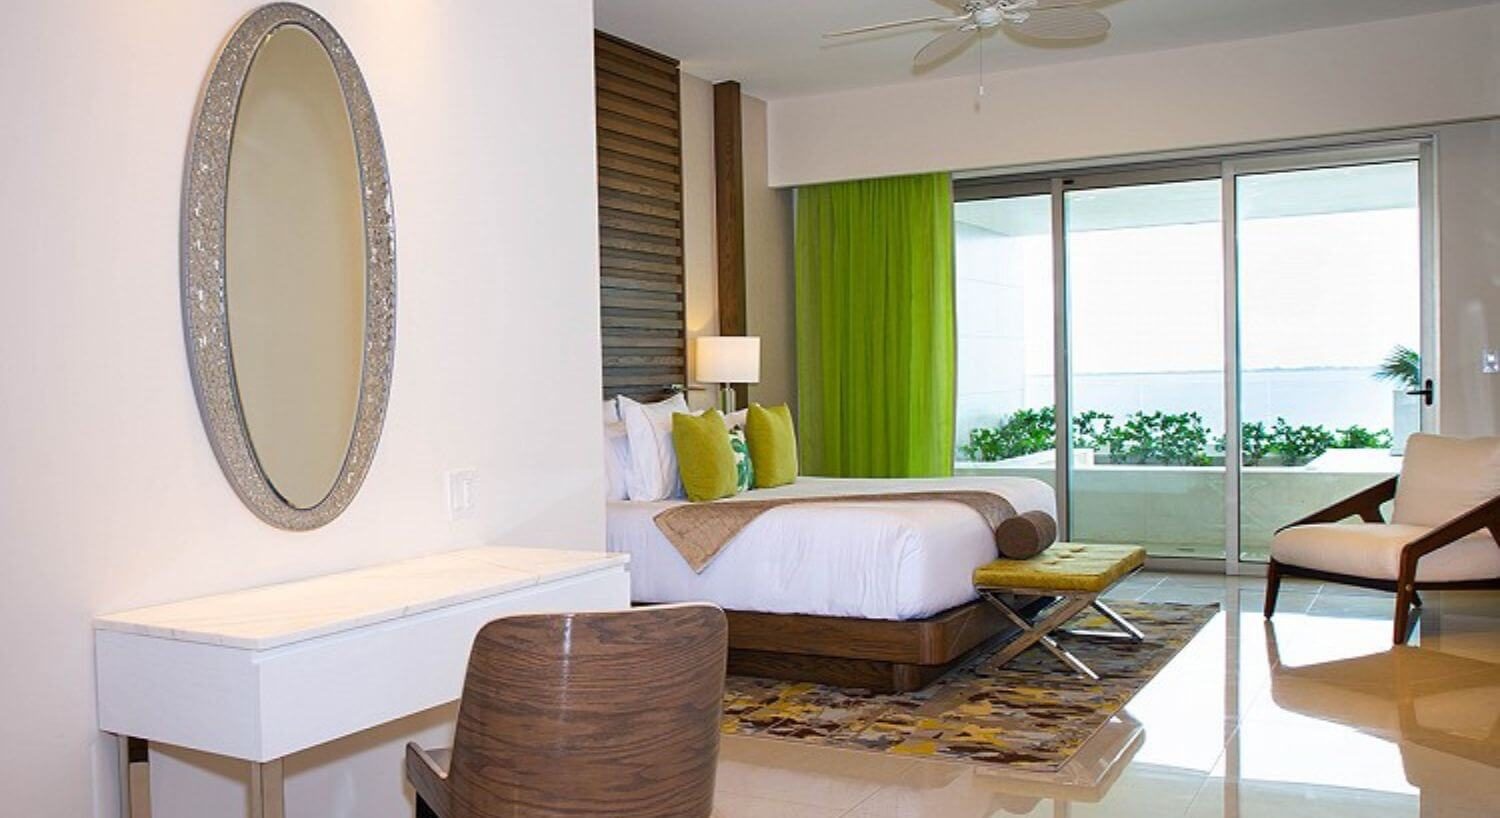 A bedroom with a King bed with white and green bedding, a bench at the foot of the bed, a writing desk and chair with a mirror above it, an armchair in the corner, and sliding glass doors leading out to a balcony with a hot tub and ocean views.